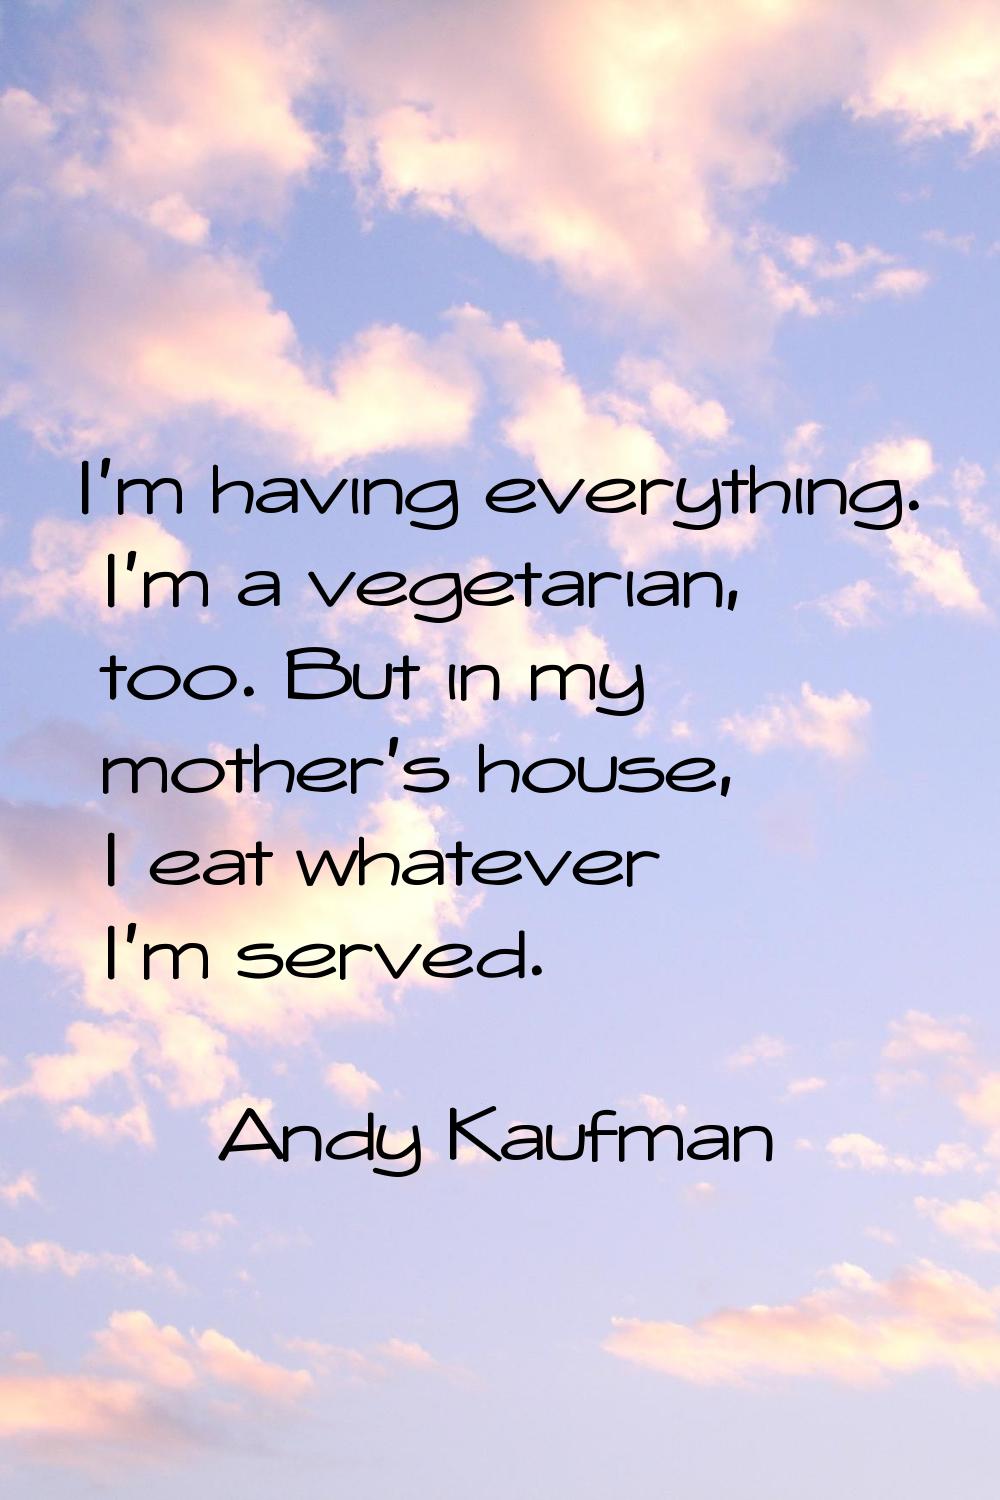 I'm having everything. I'm a vegetarian, too. But in my mother's house, I eat whatever I'm served.